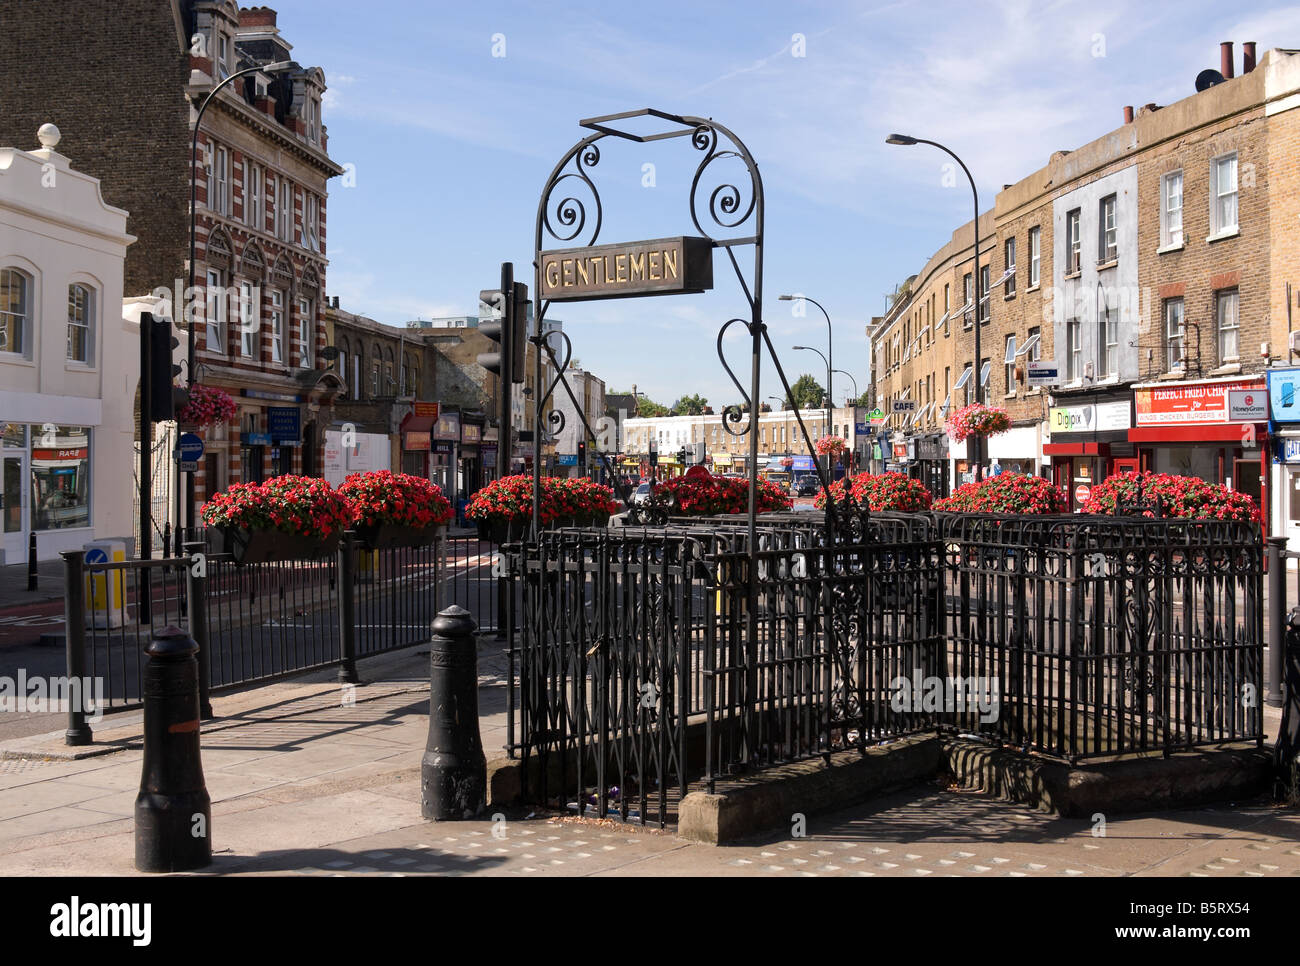 Public conveniences on a traffic island in New Cross Gate, London Stock Photo